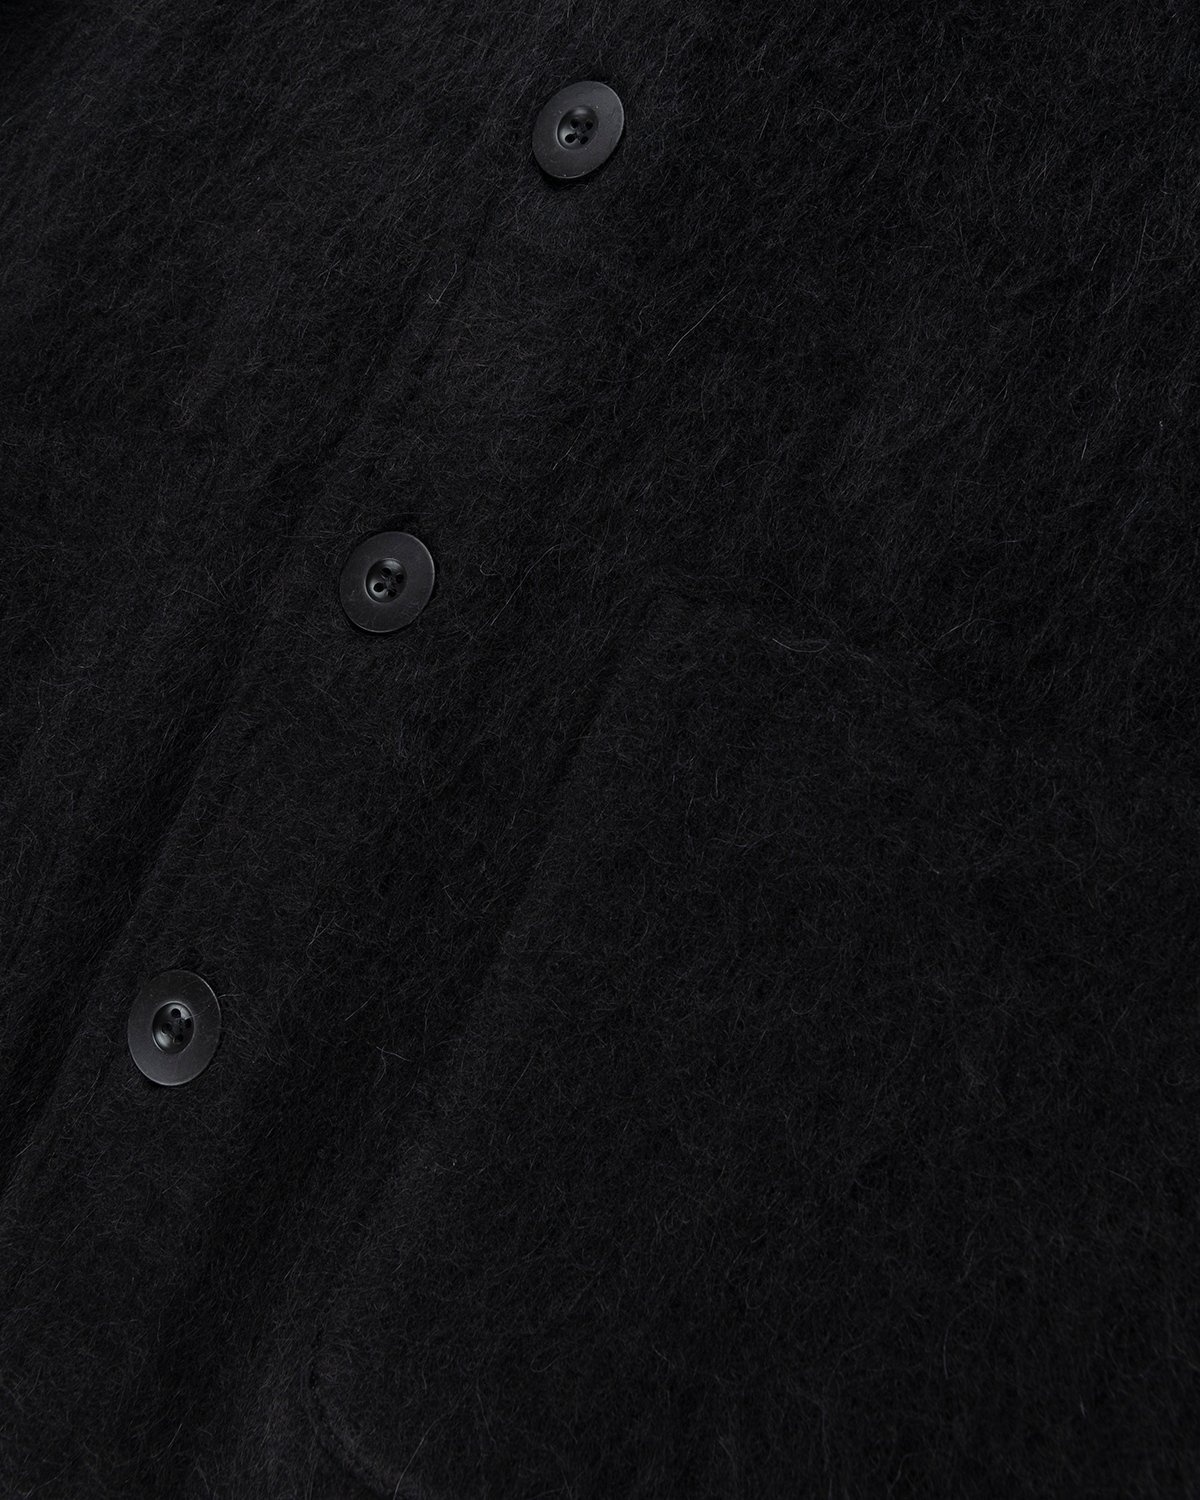 Our Legacy – Cardigan Black Mohair - Cardigans - Black - Image 5